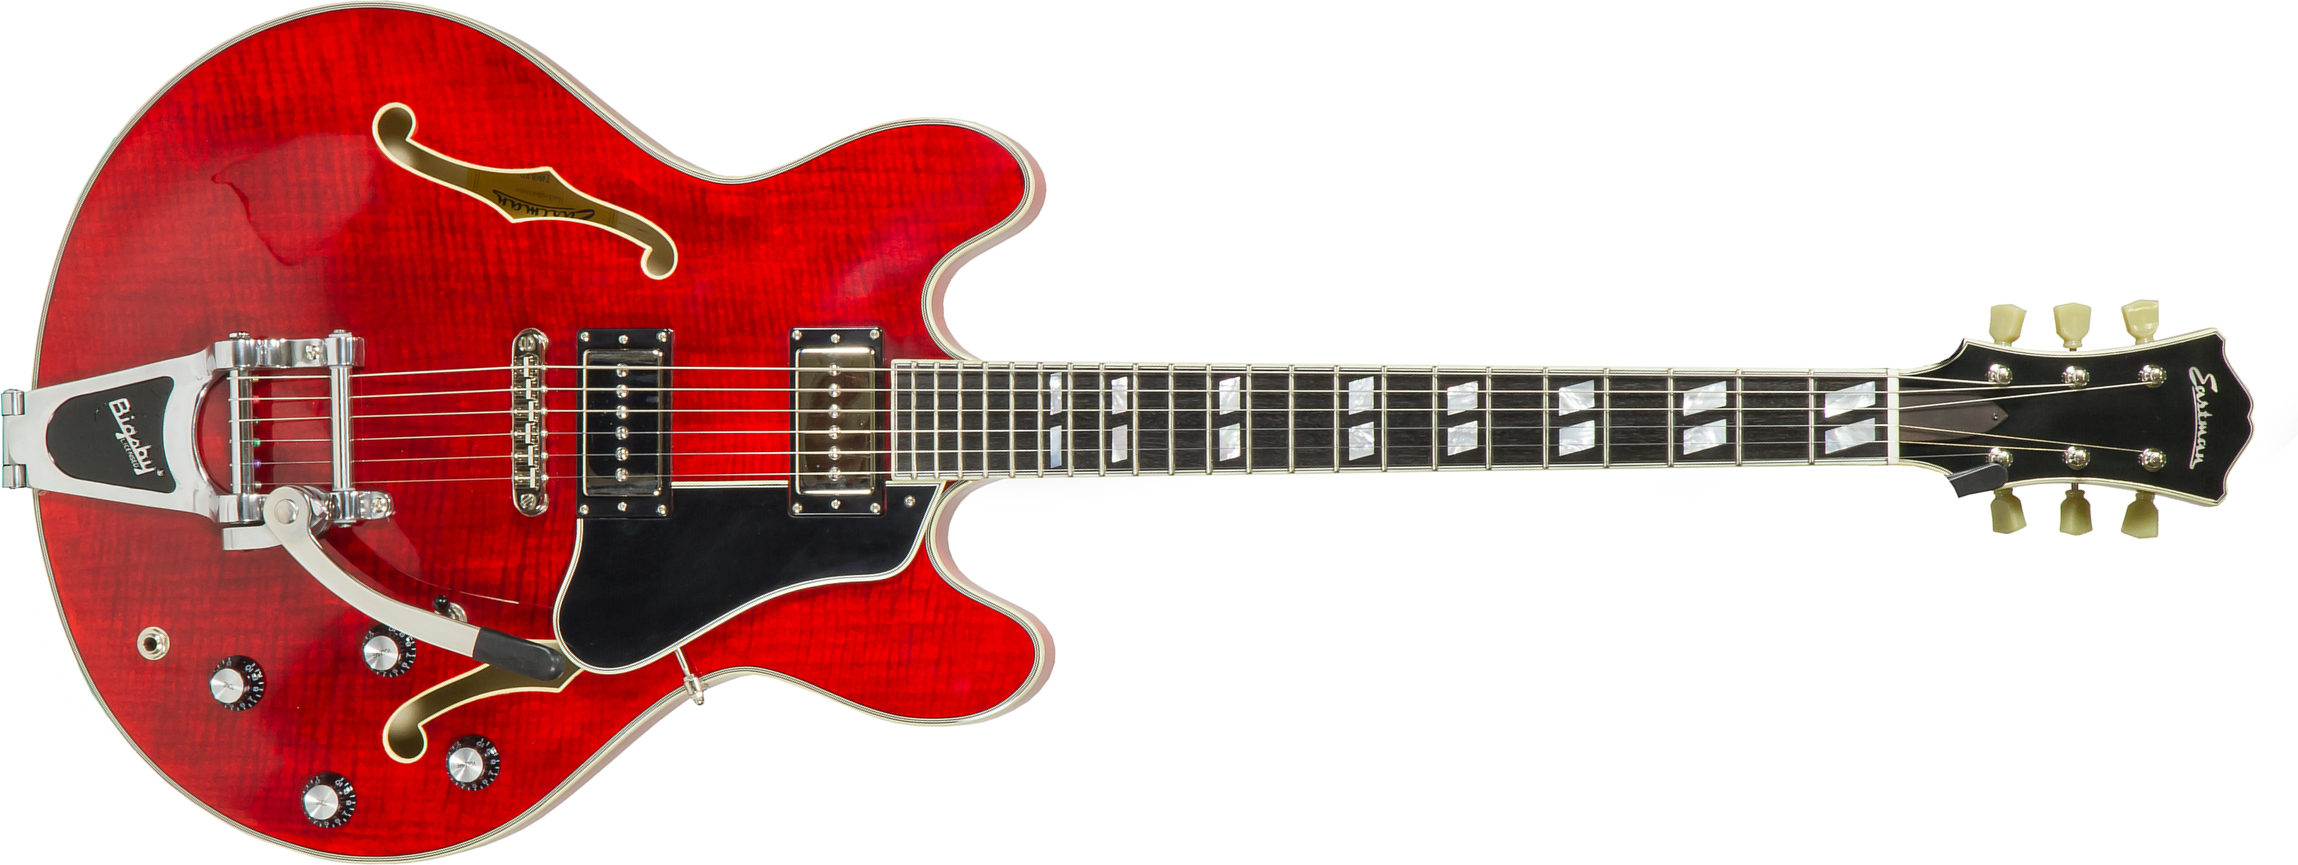 Eastman T486b Thinline Laminate Tout Erable Ss Seymour Duncan Bigsby Eb - Red - Semi-hollow electric guitar - Main picture